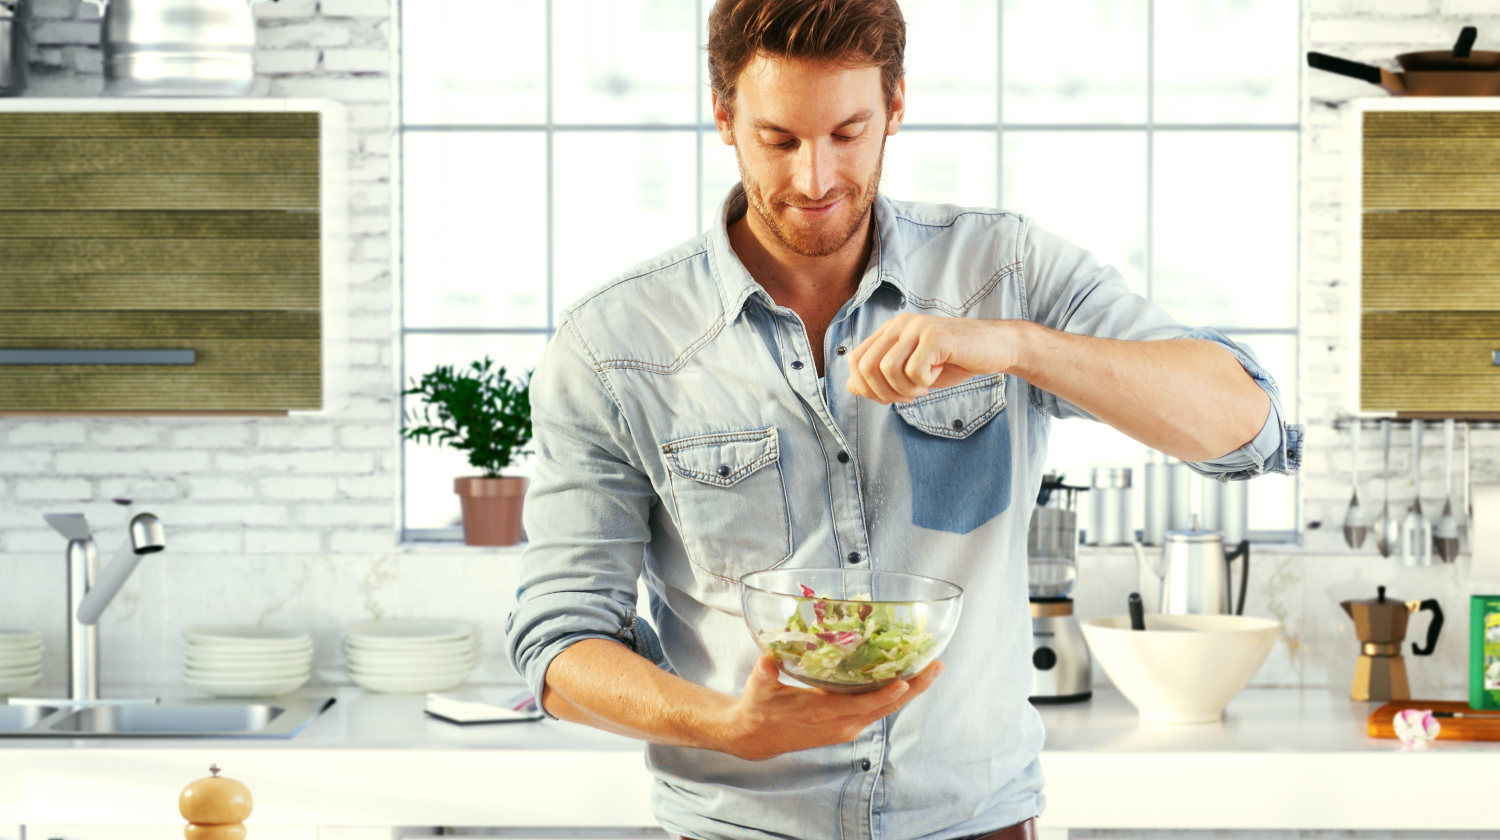 Featured | Handsome man cooking at home preparing salad in kitchen | Can I Use Herbs and Tubers When I’m On A Ketogenic Diet?